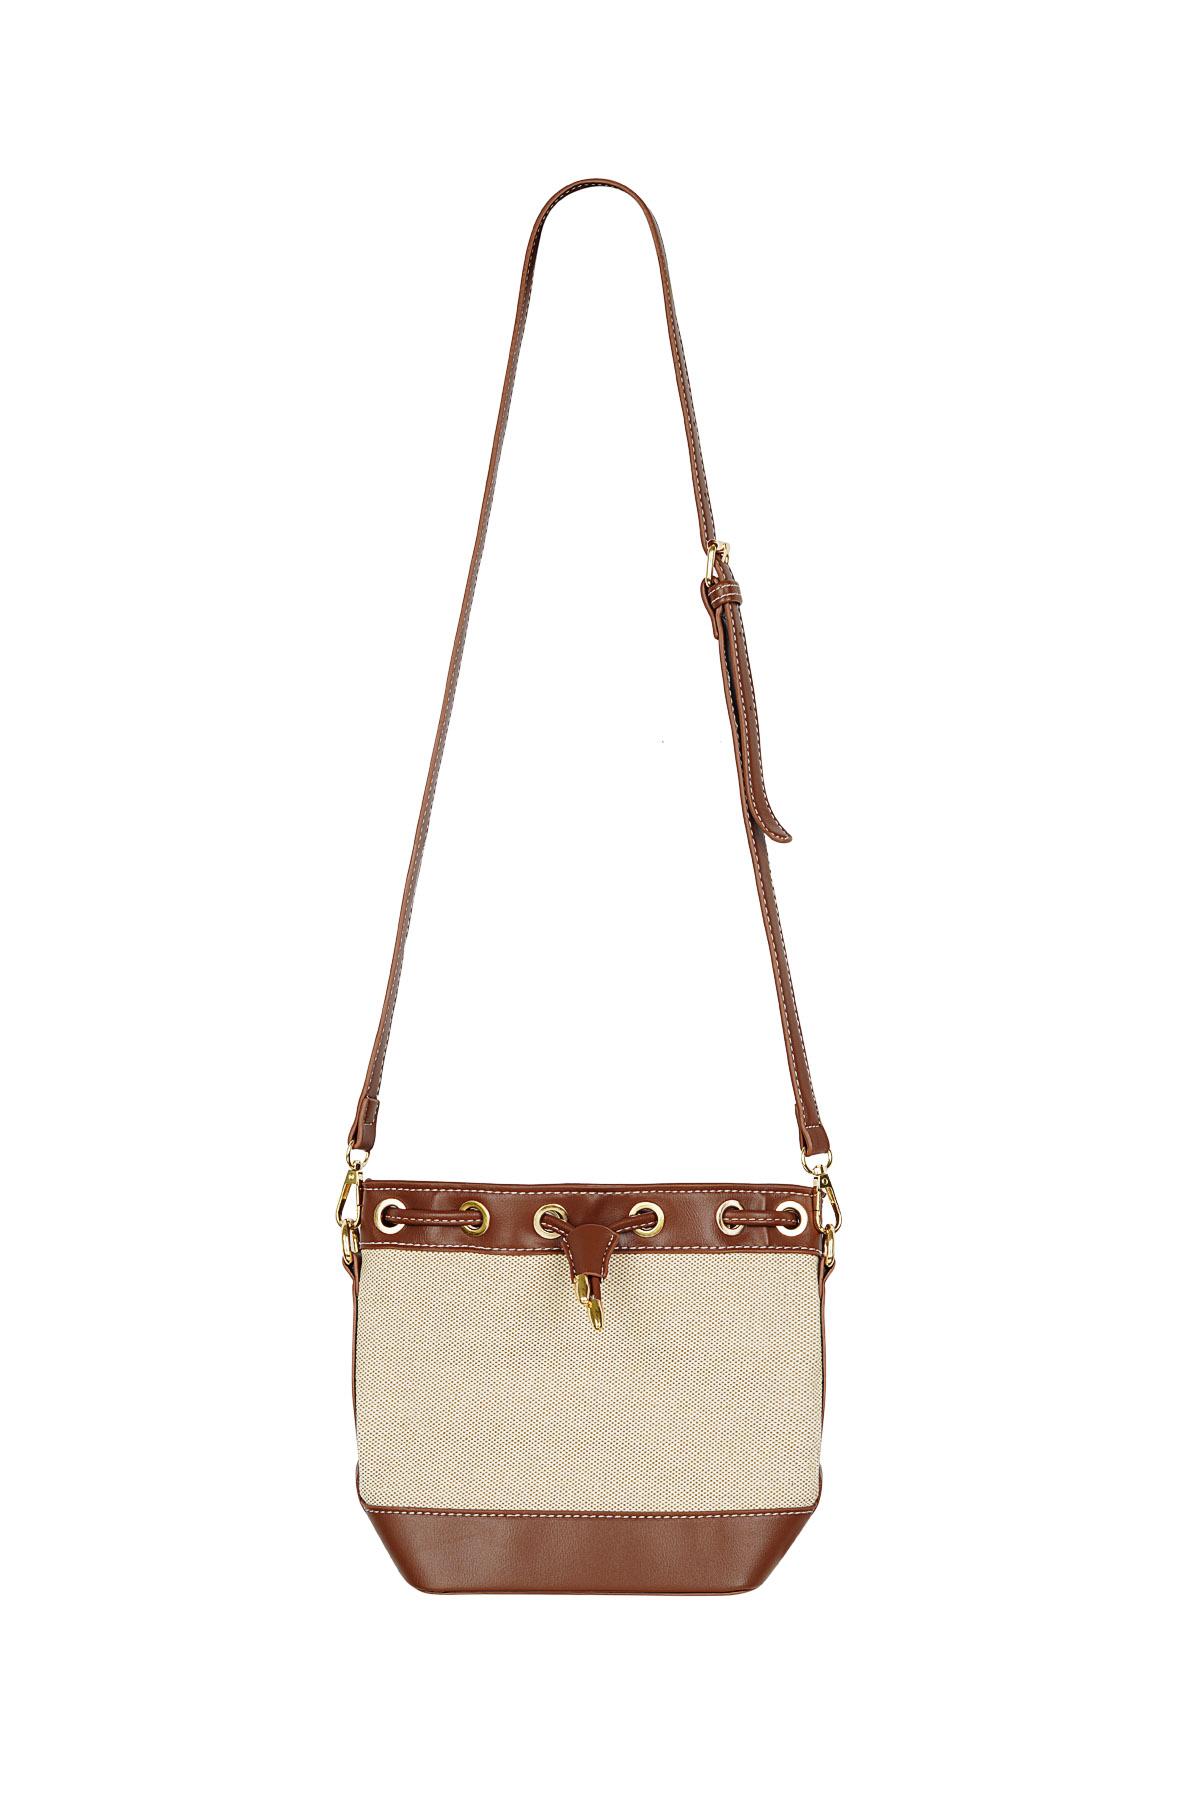 Bucket bag old money style - brown/beige h5 Picture5